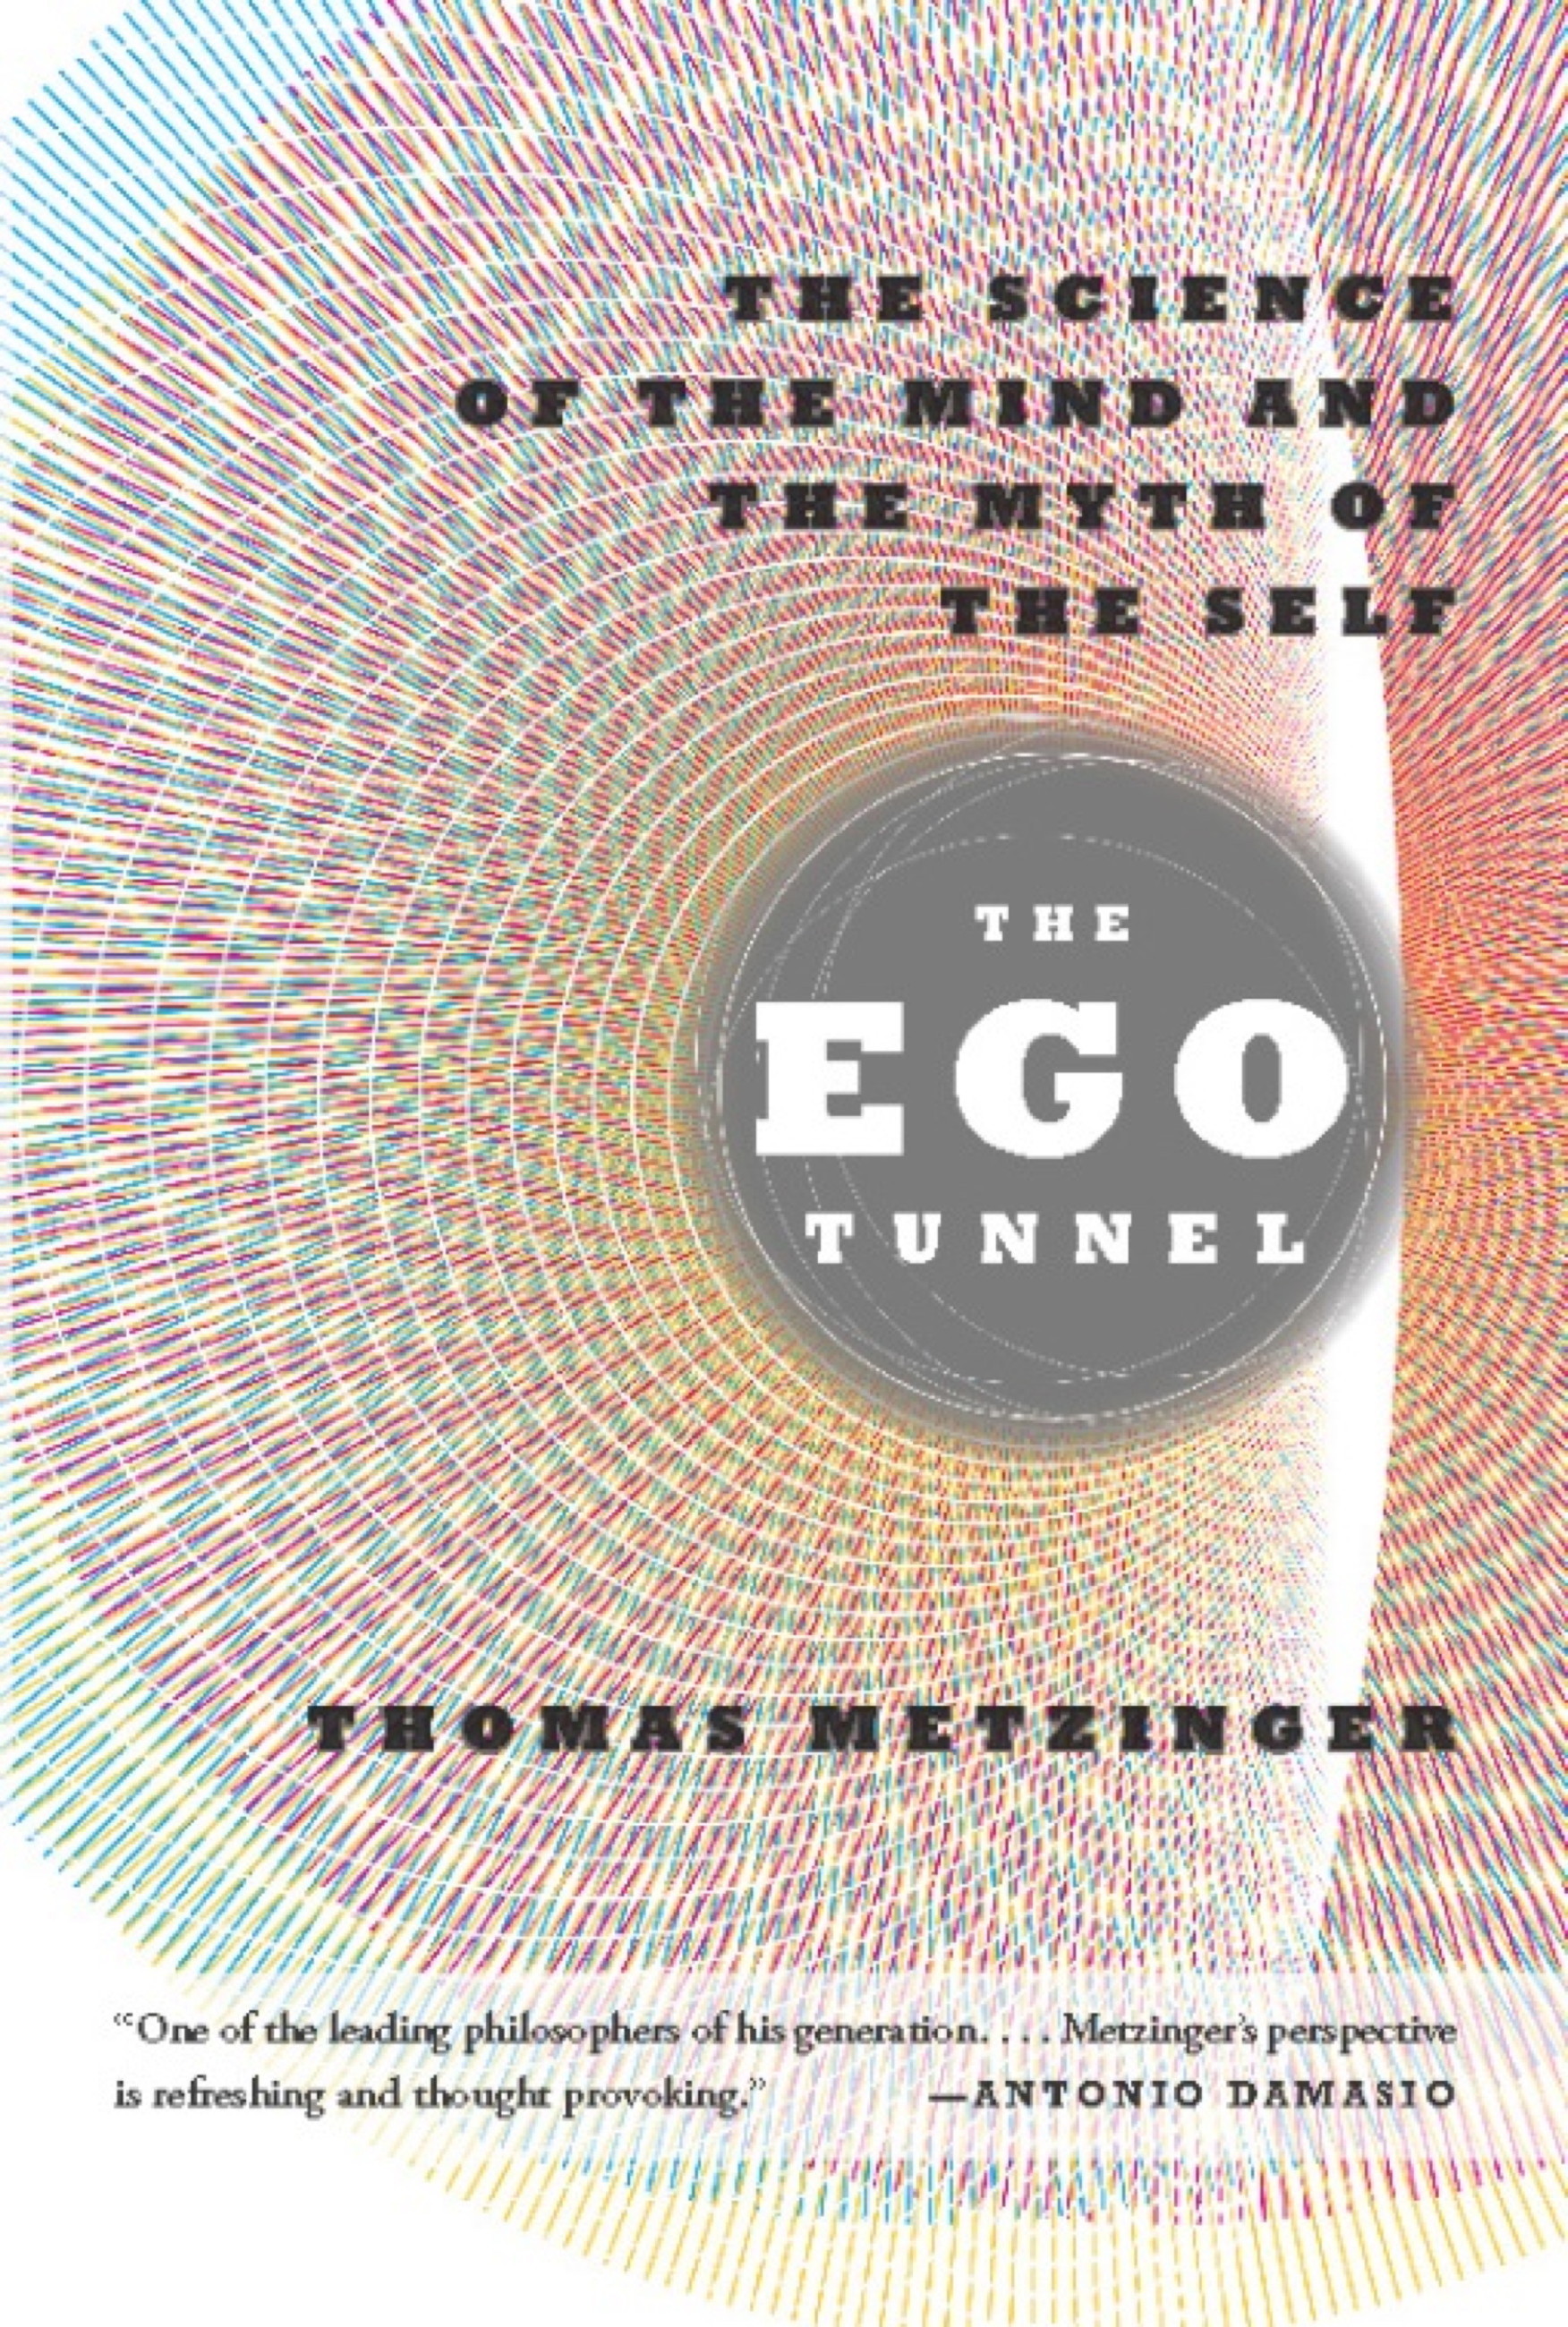 The Ego Tunnel - 10-14.99